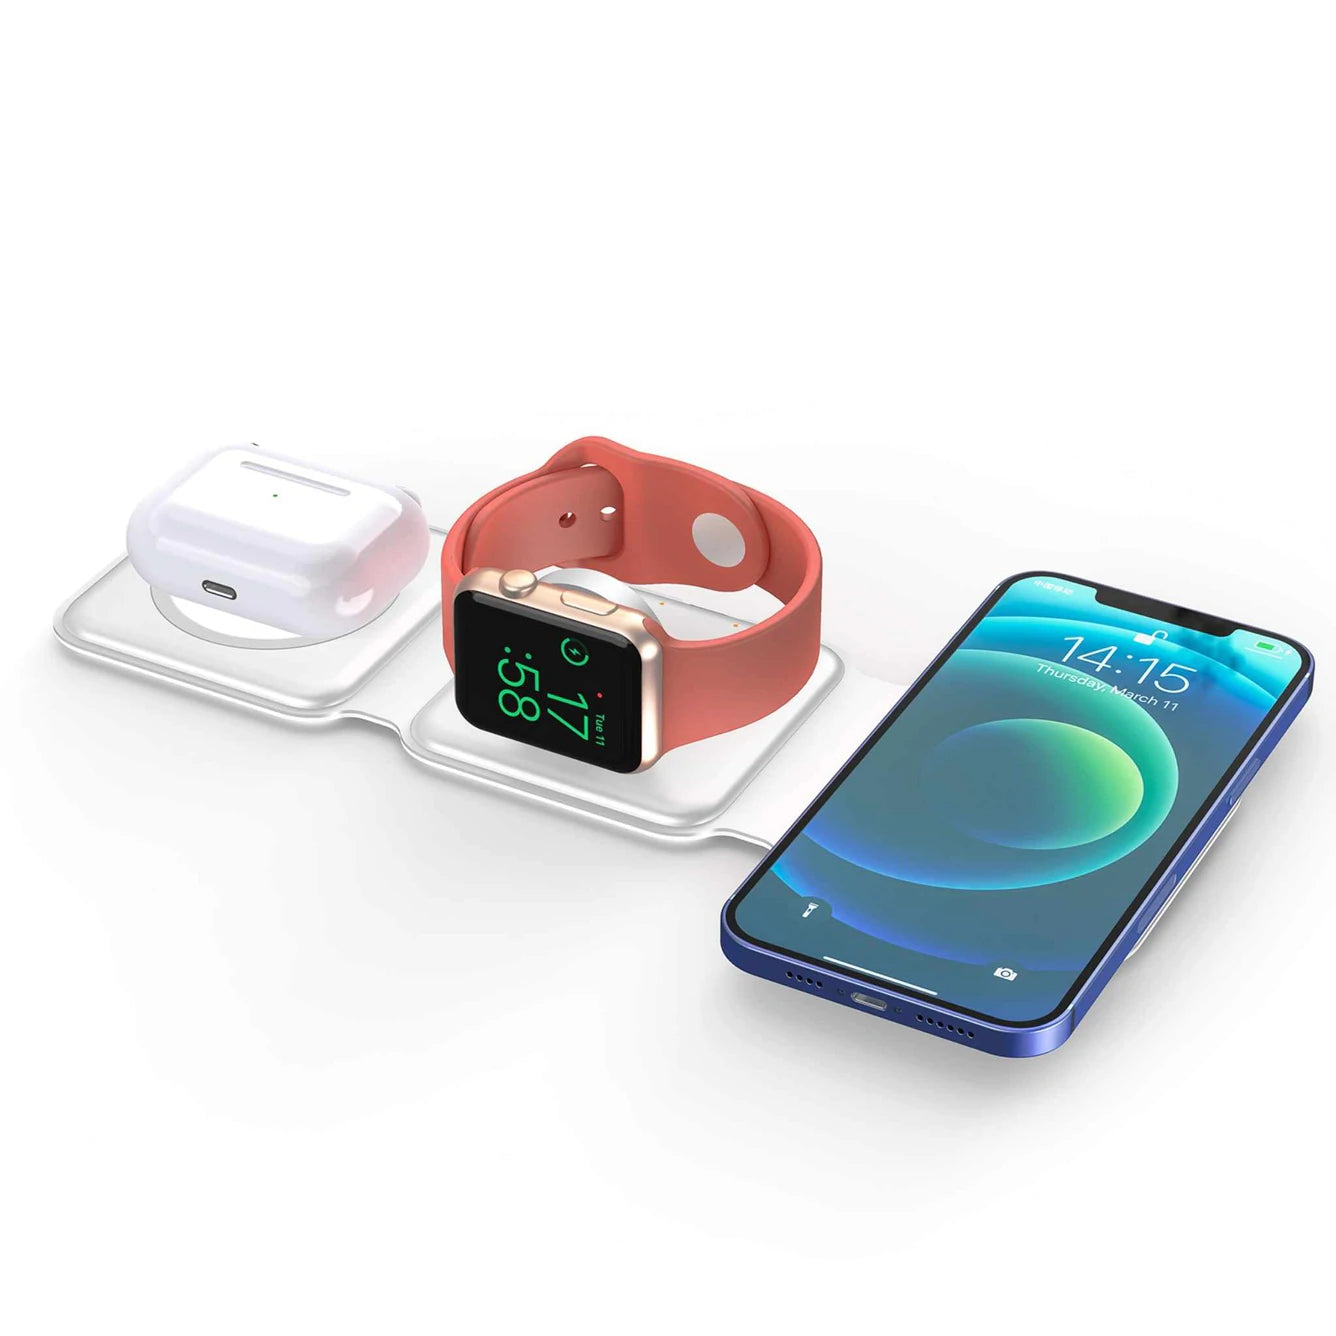 3 in 1 Wireless Travel Charger